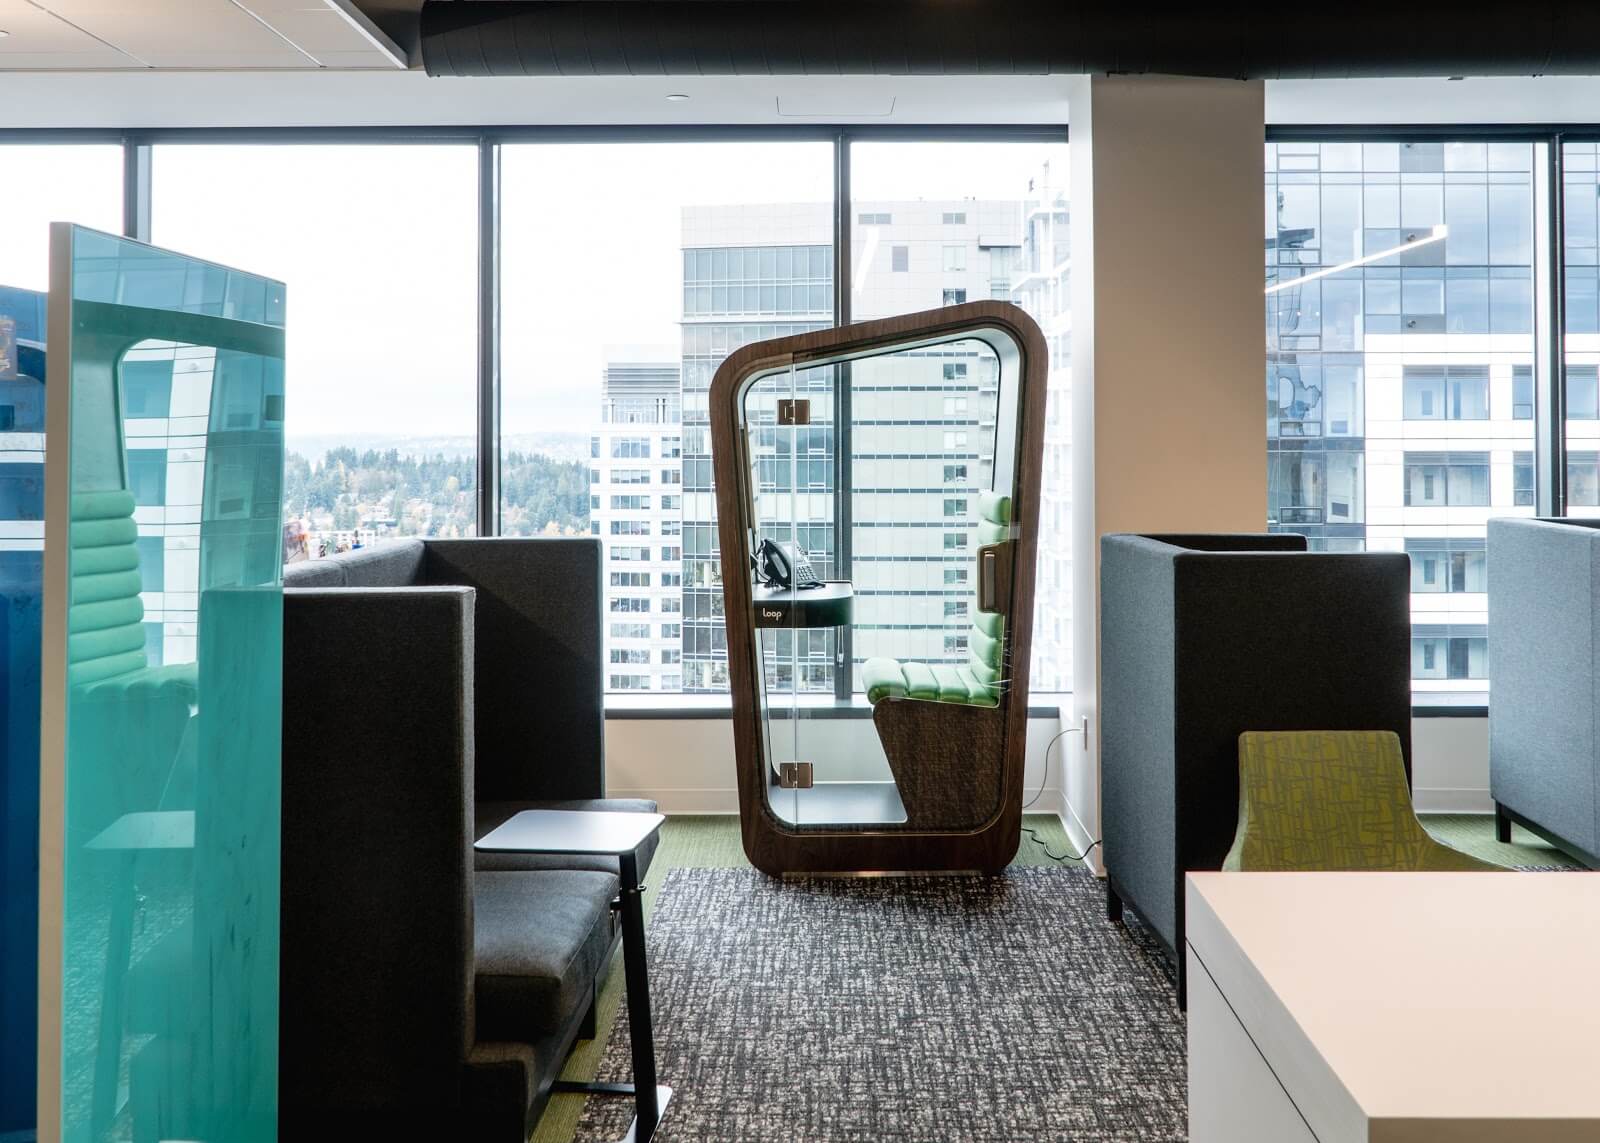 A dark wood Loop Solo with green interior sits in an office space against a large glass window